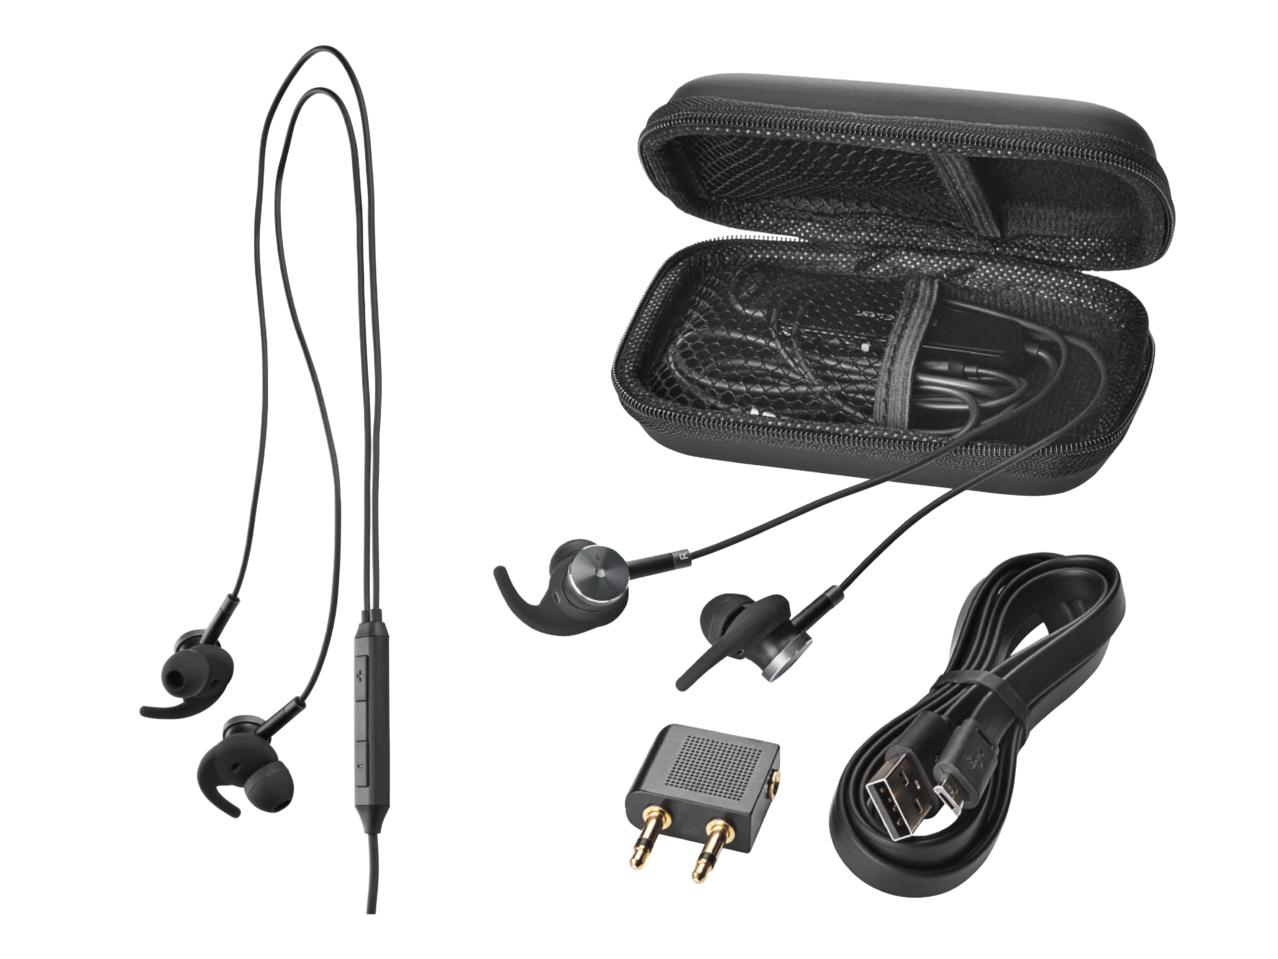 In-Ear Headphones with Active Noise Control